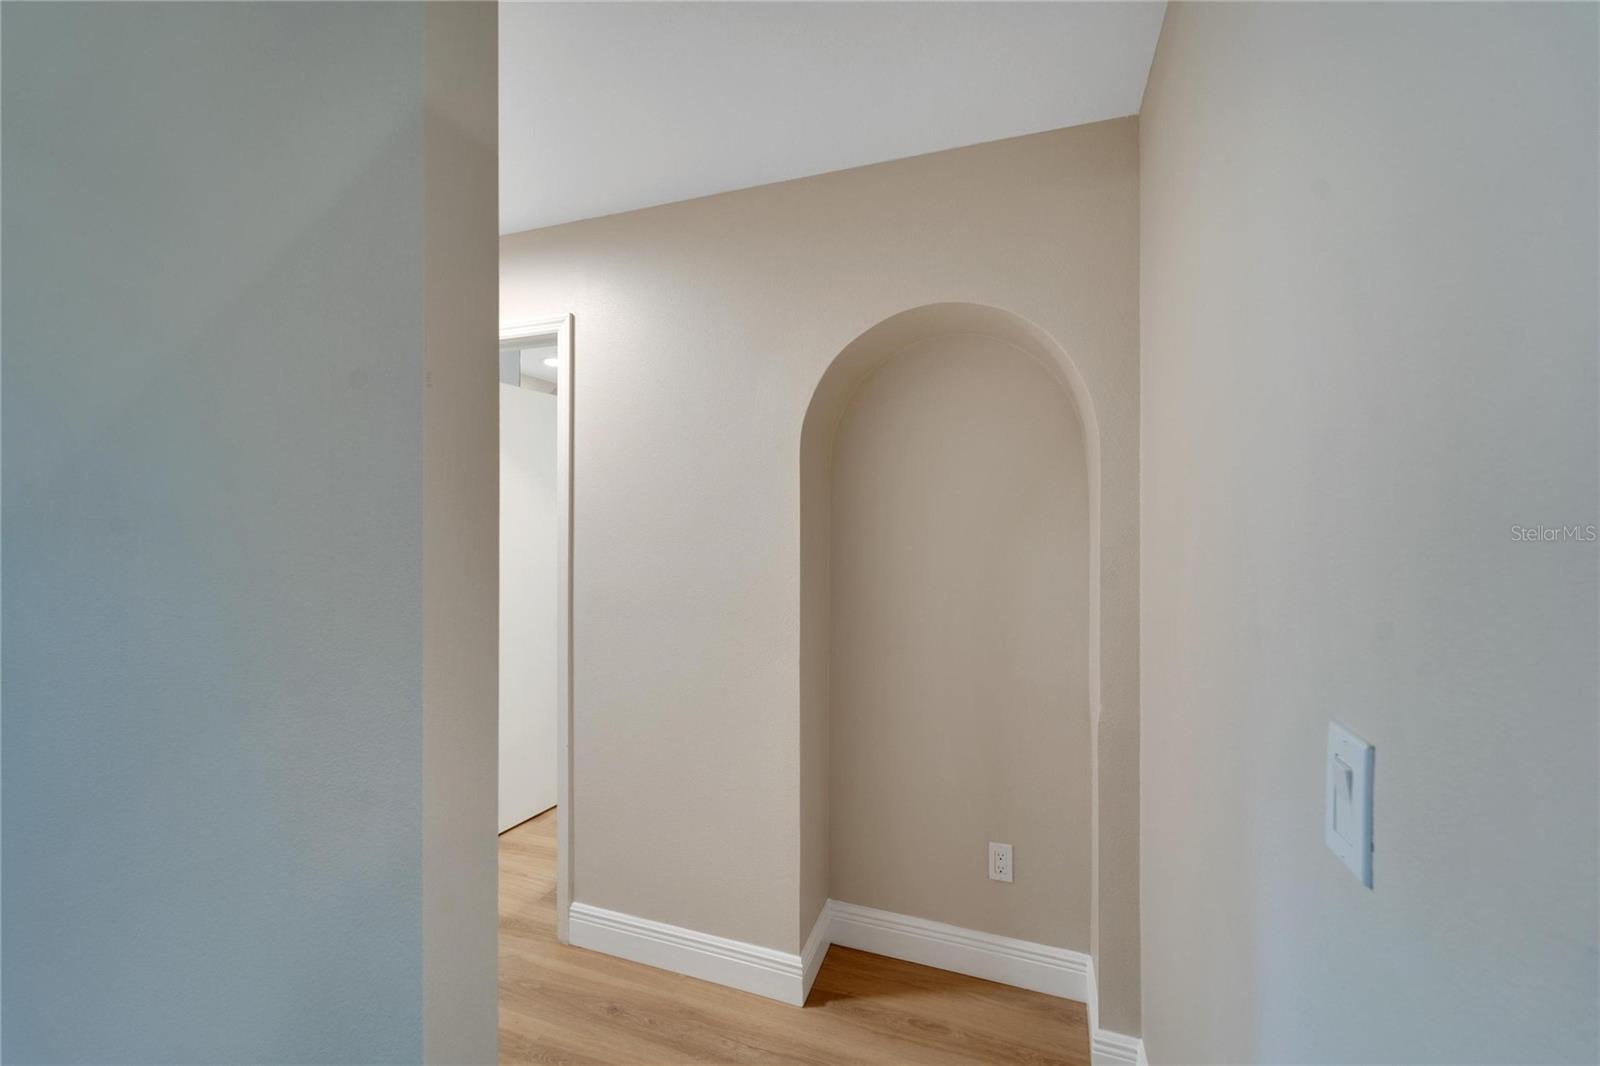 Unique arched wall niche, perfect for an arched bookcase or piece of art.  Notice the electrical outlet for your convenience.